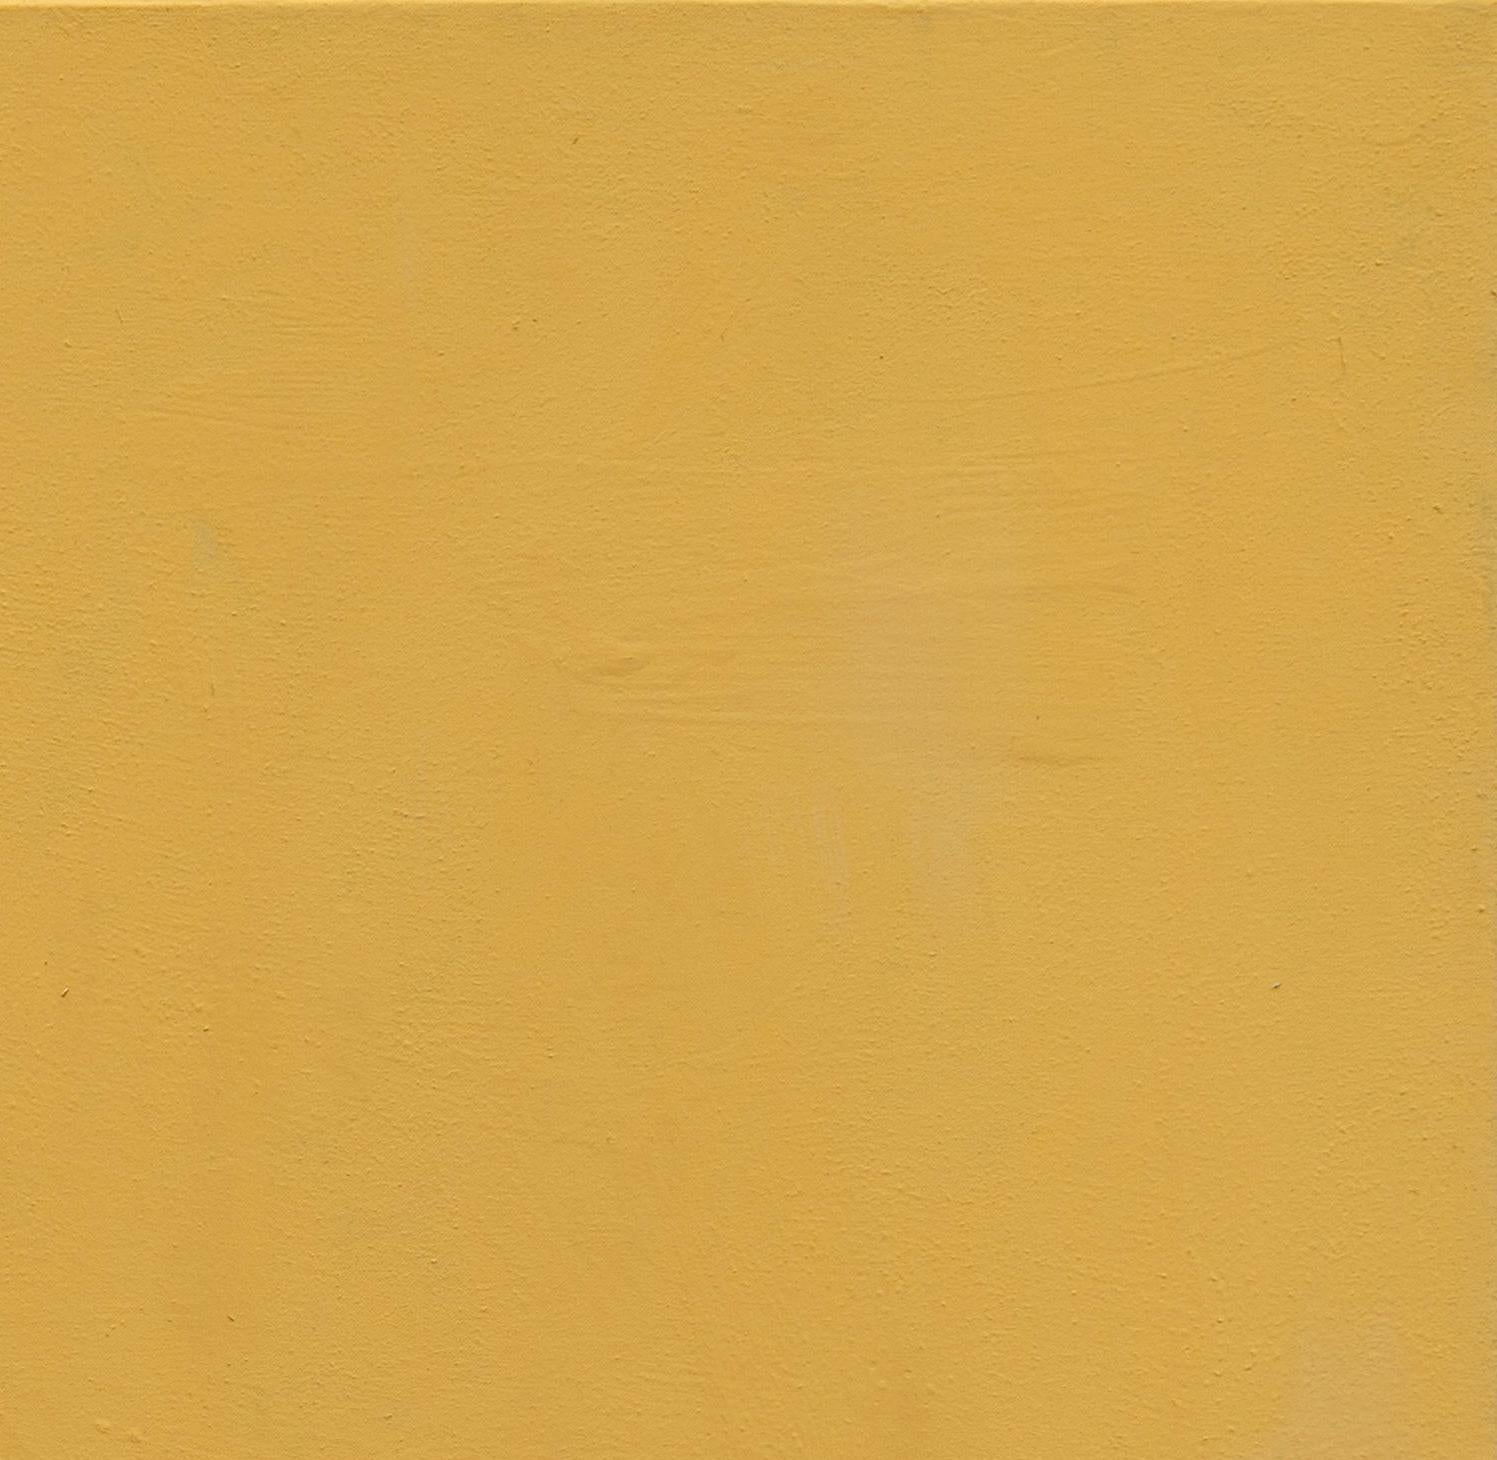 Impar With Yellow - 21st Century, Contemporary, Abstract Painting, Gold Leaf 3